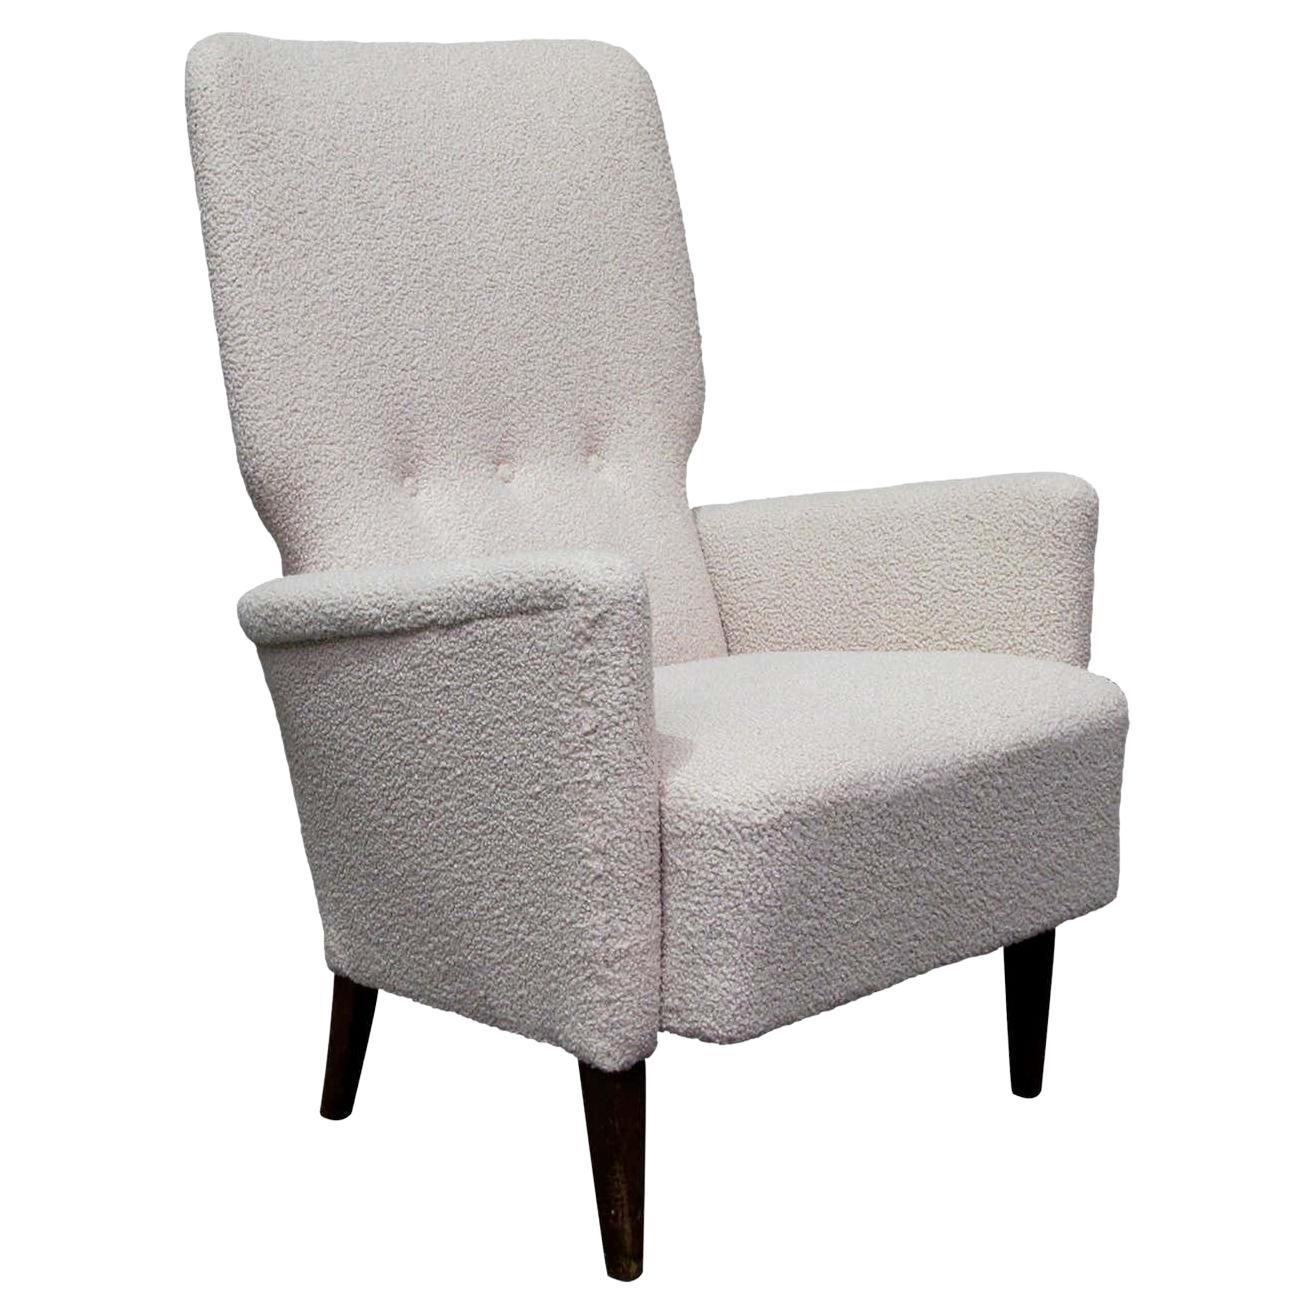 1940s Danish High Back Three Buttoned Lounge Chair in Cream Bouclé Fabric